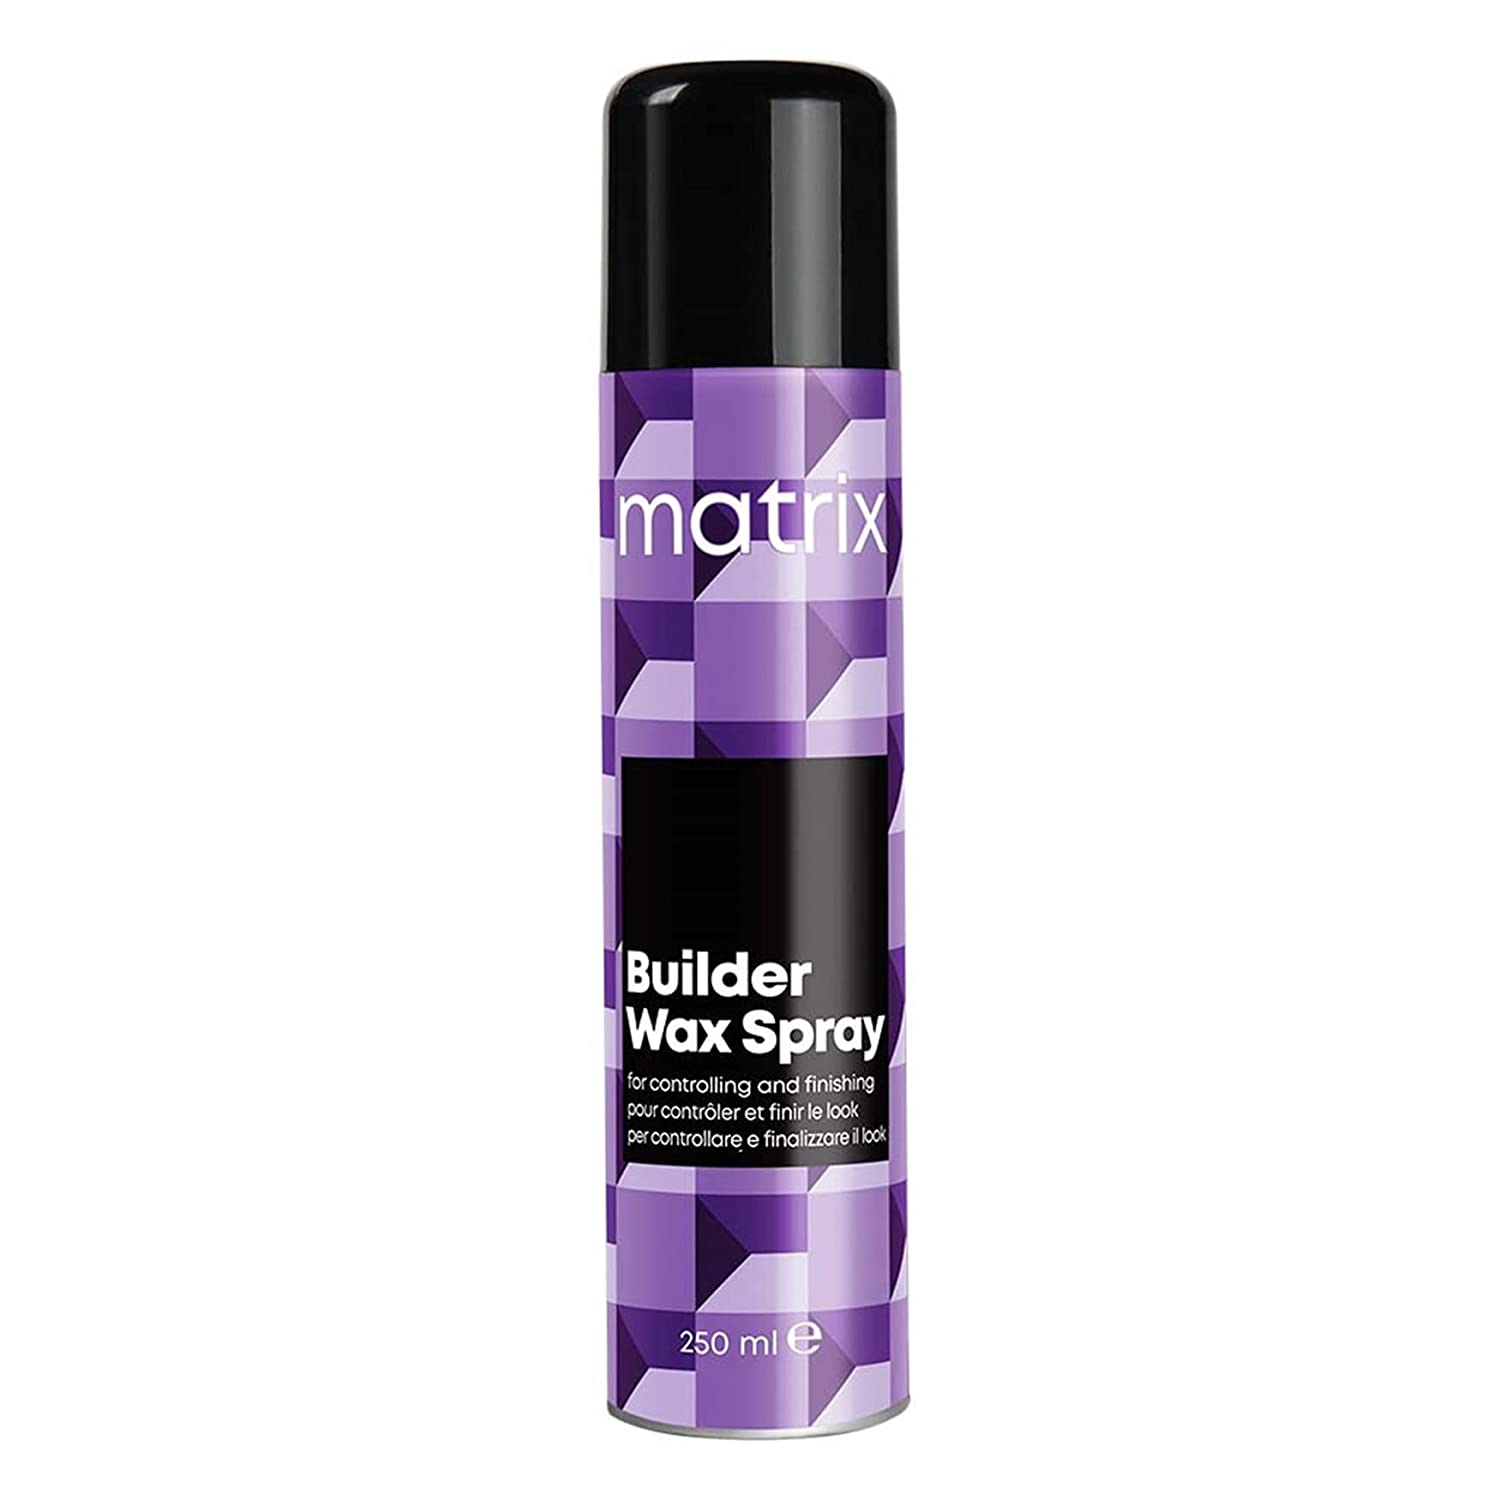 Matrix Structure-enhancing wax spray, for all hair types and a silky matte finish, for more control, styling builder wax spray, 1 x 250 ml